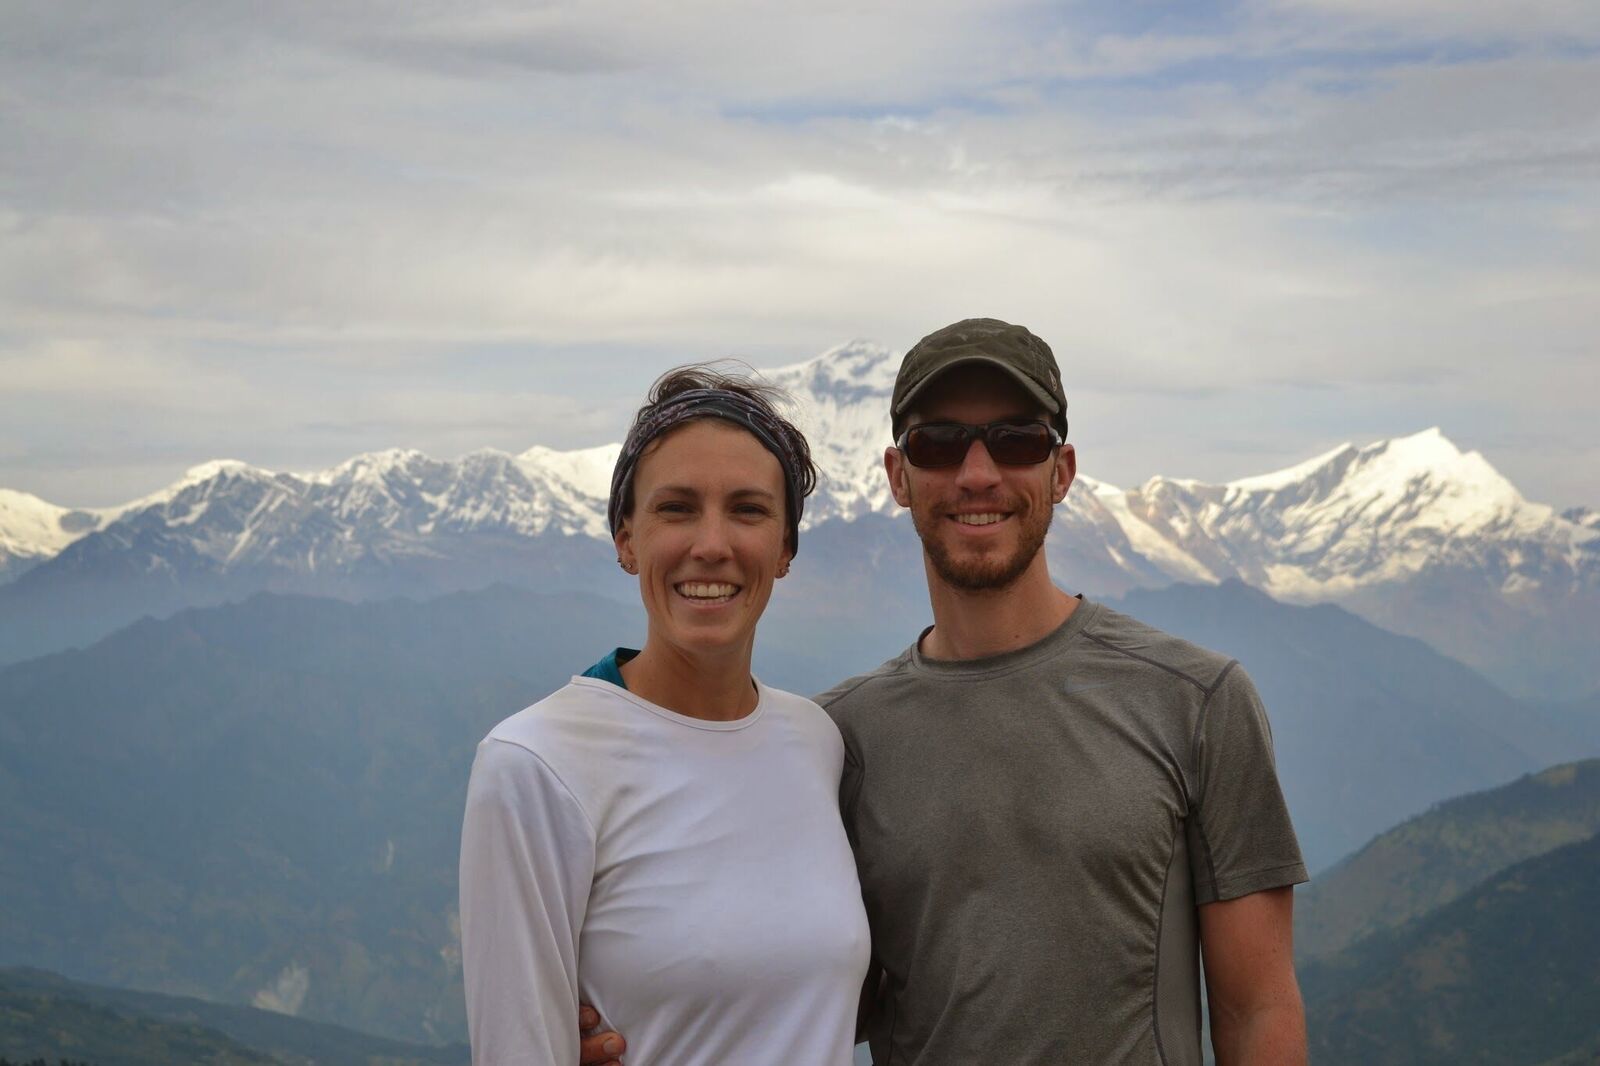 Annie and Brad smiling in front of a mountain range in Colorado